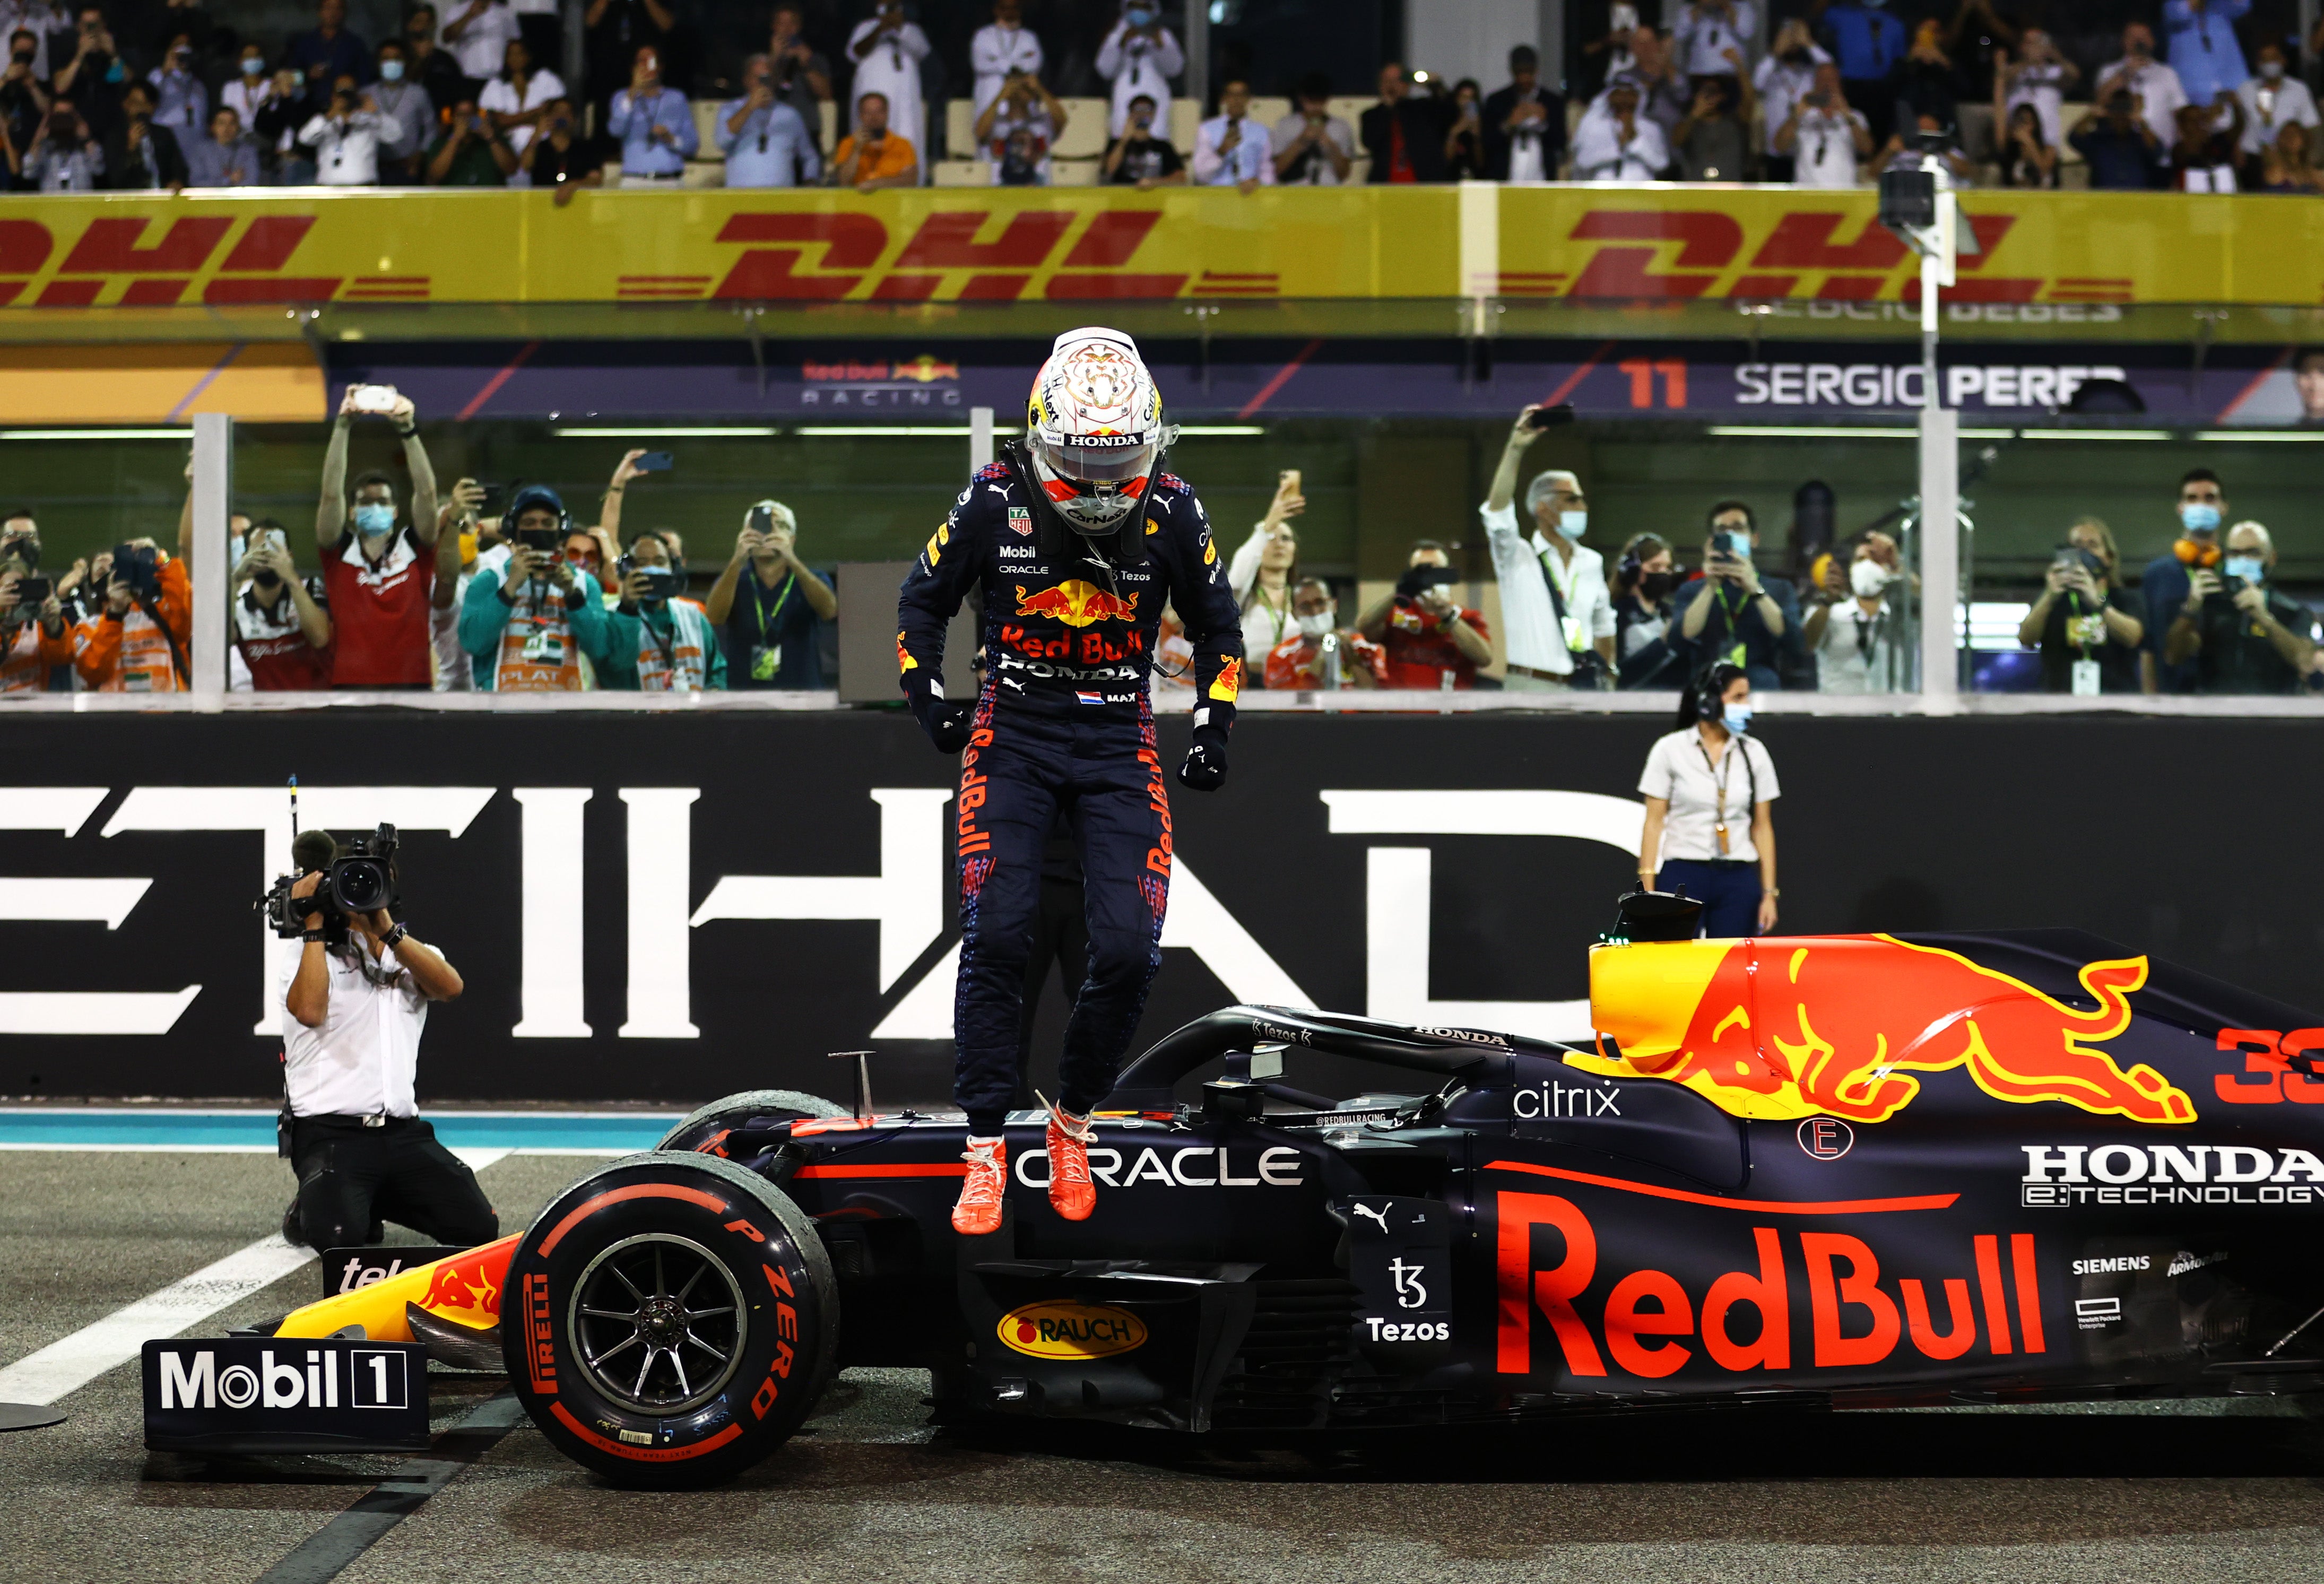 Max Verstappen secured his first world title with victory in Abu Dhabi